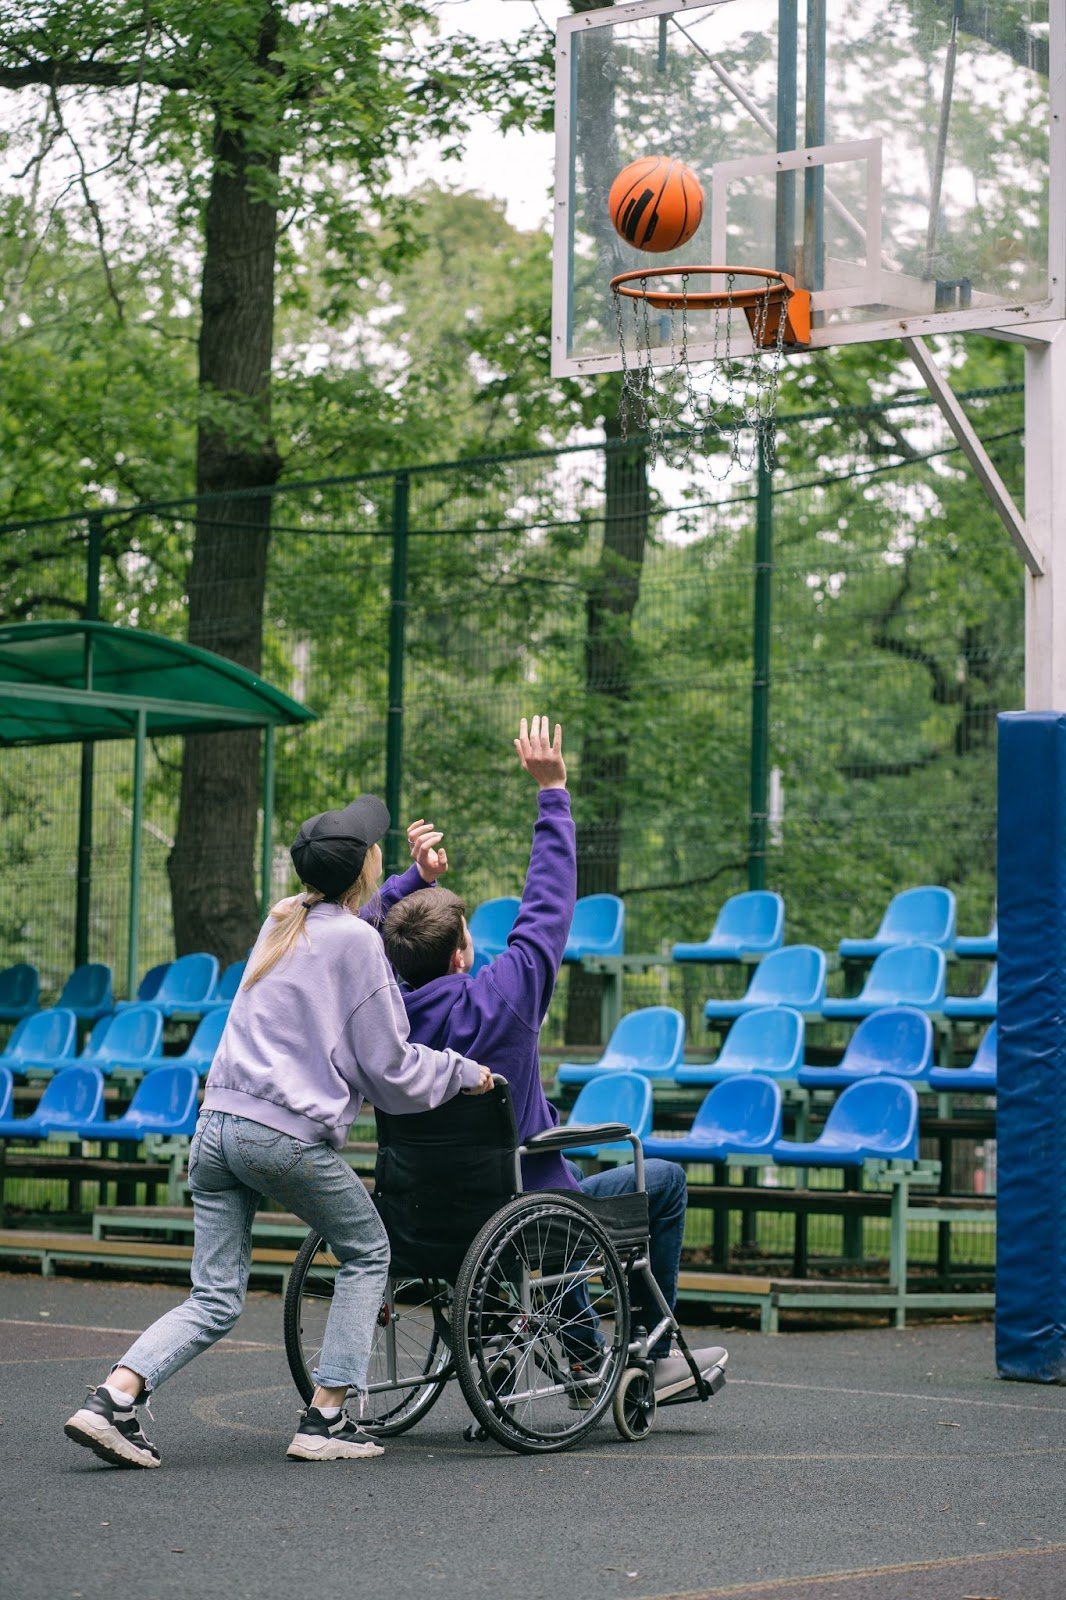 A woman pushes a man in a wheel chair who is shooting basketball